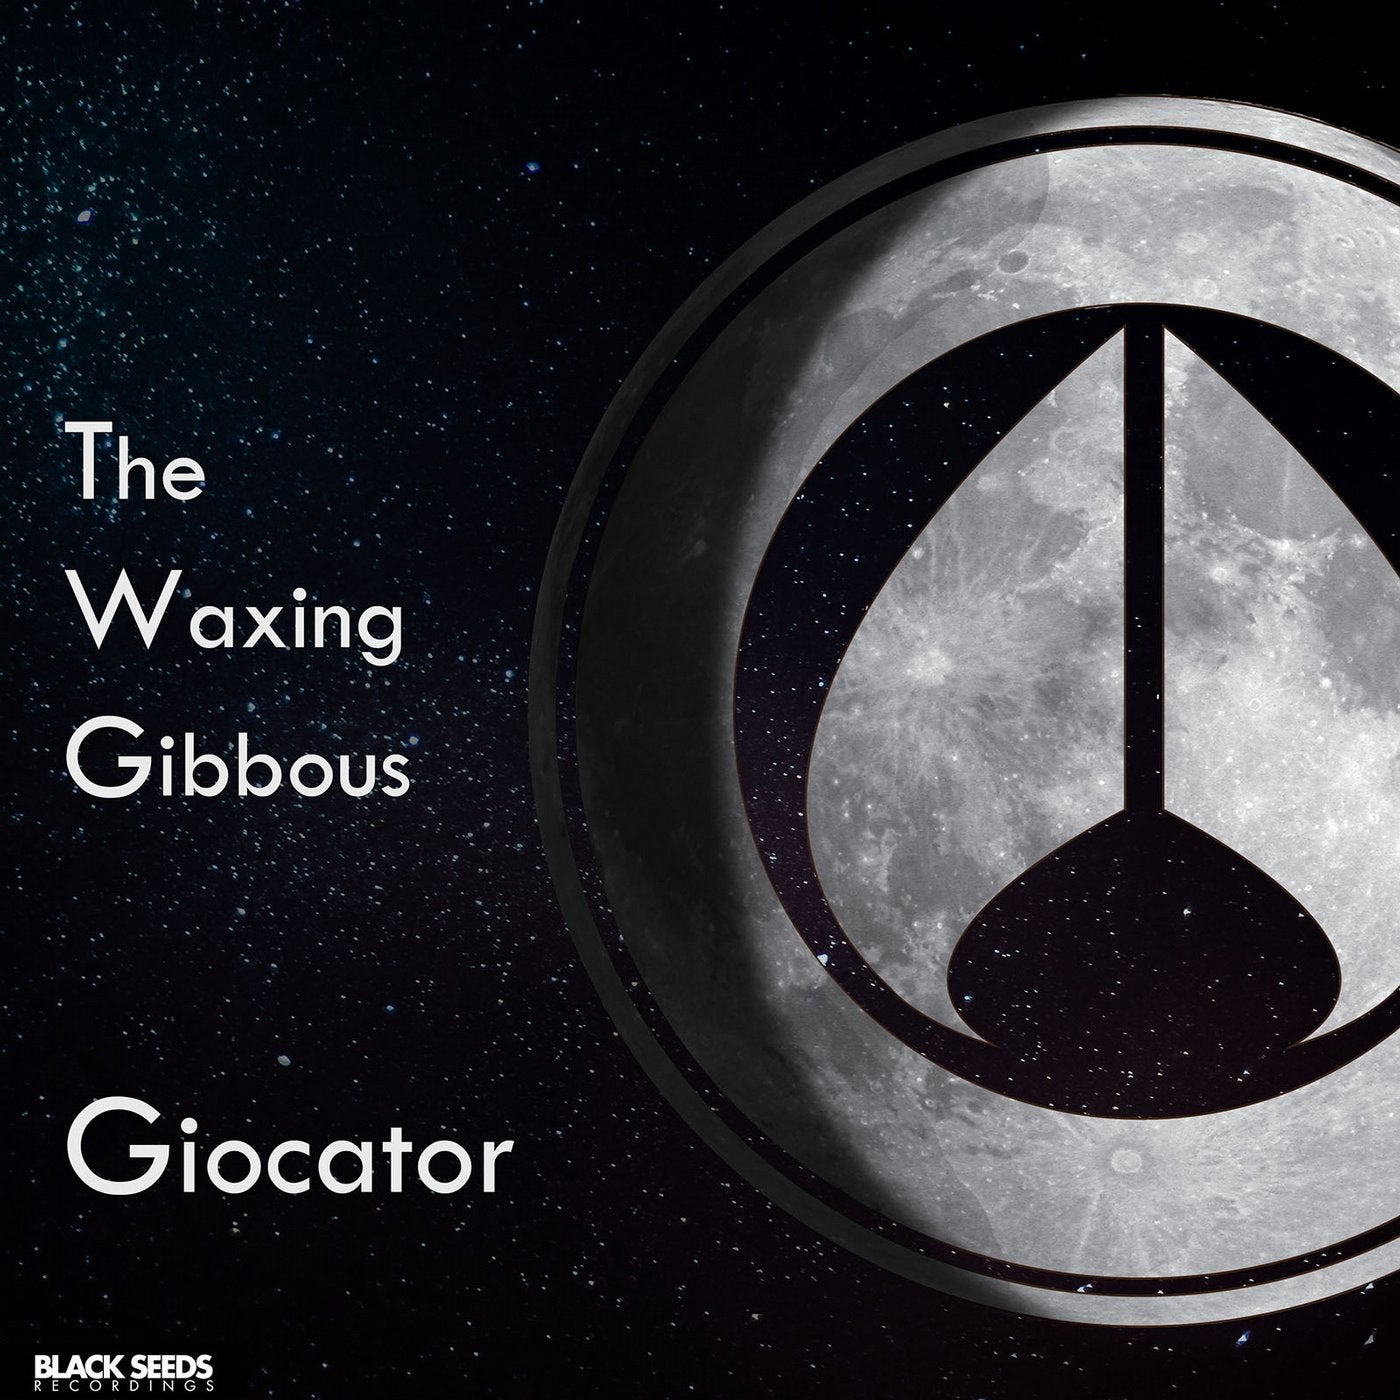 The Waxing Gibbous